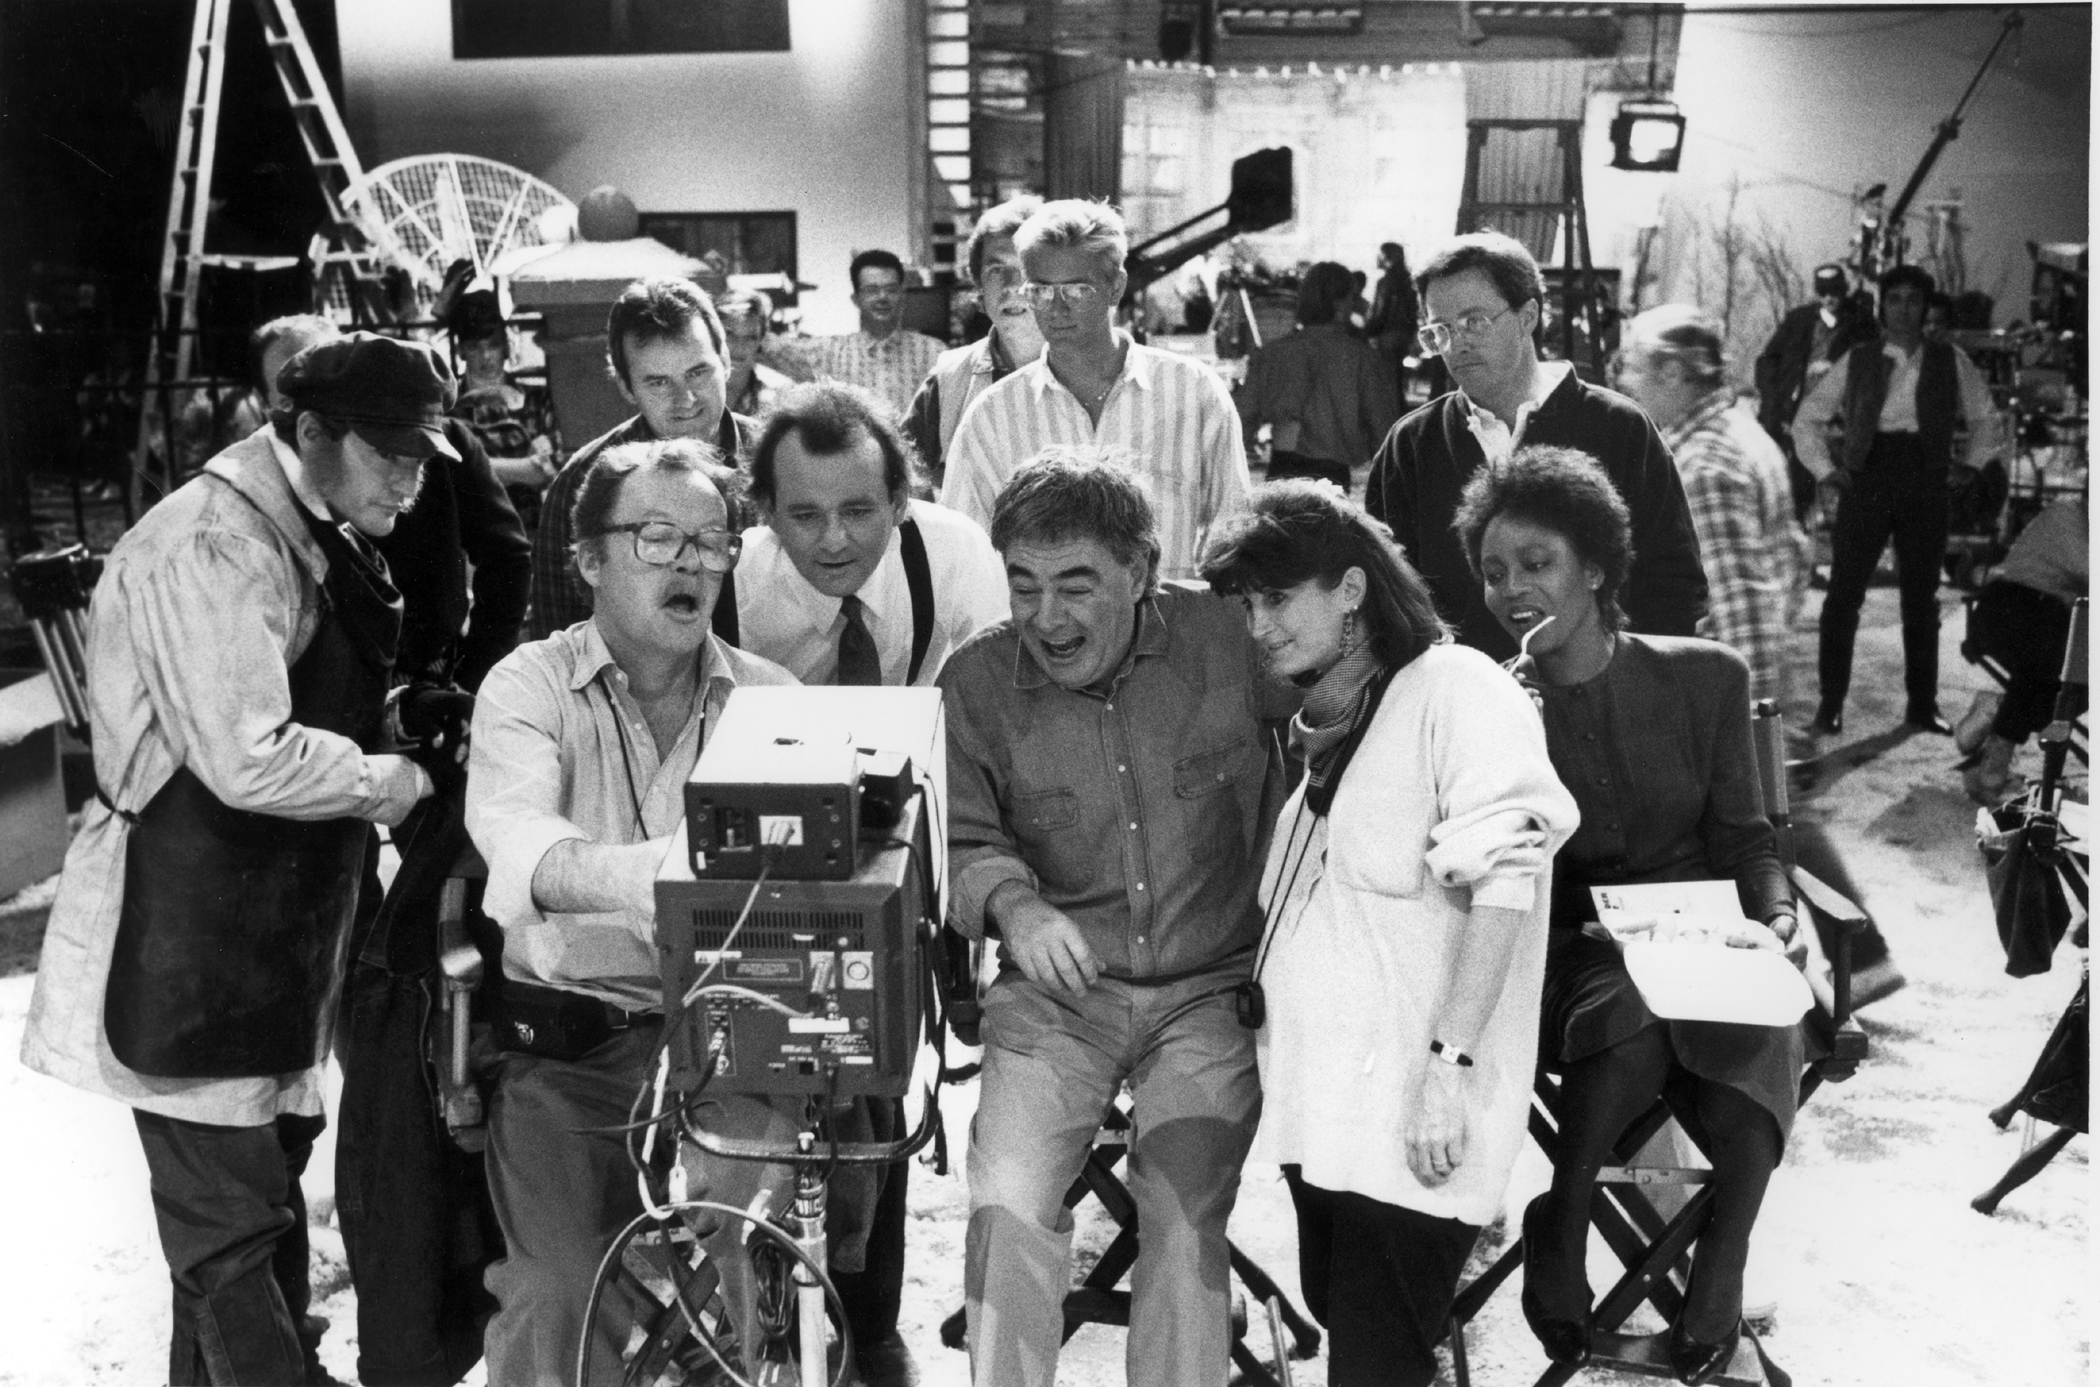 While filming the comedy Scrooged (1988), with star Bill Murray and director Richard Donner.